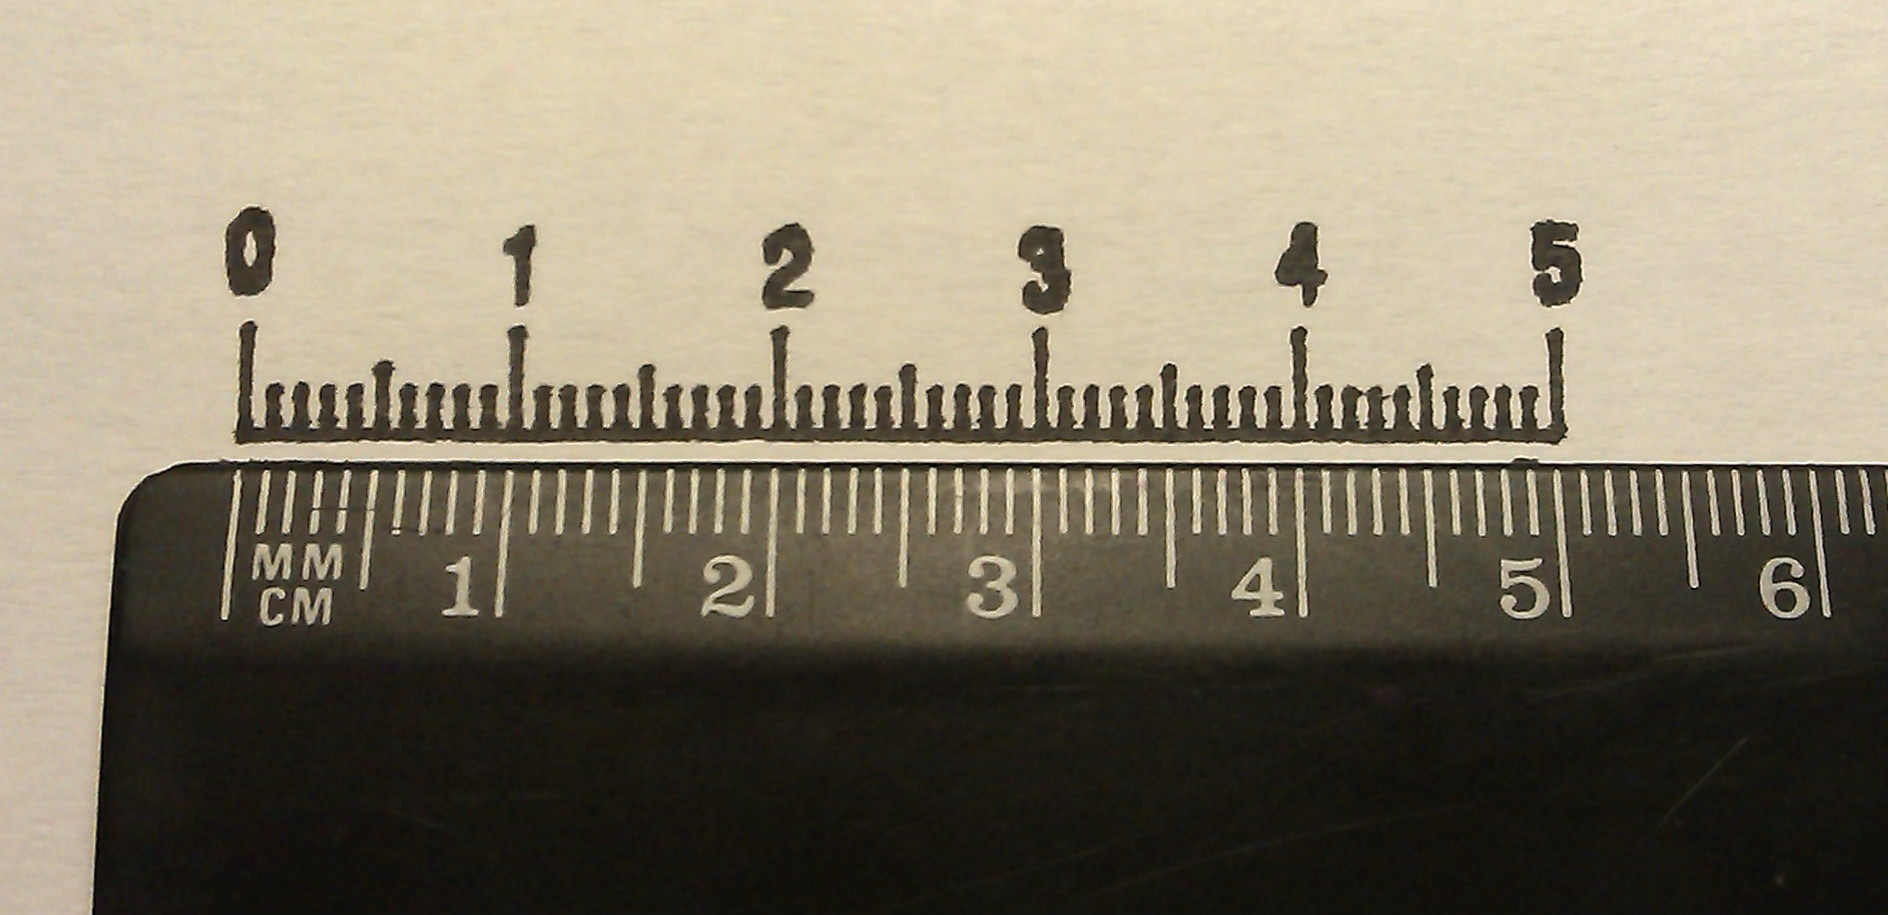 Comparing a plotter drawing with a ruler